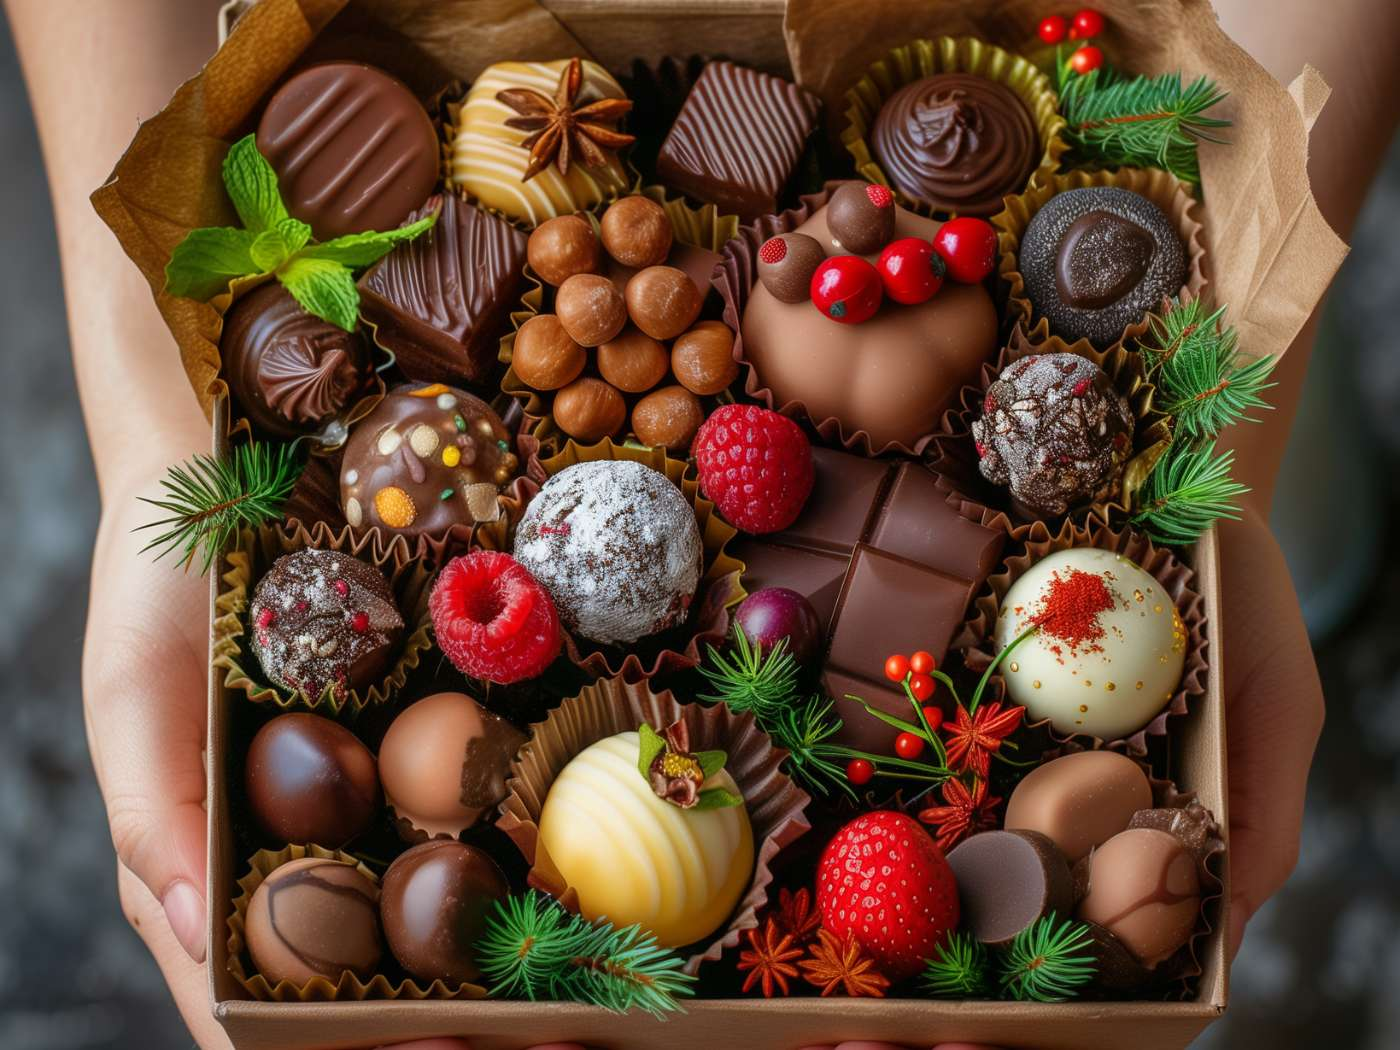 Decadent Belgian milk and white chocolate selection presented in a gift hamper, infused with vanilla flavours, part of the Chocolate and Sweets Gift Boxes Collection, accompanied by Fabulous Flowers and Gifts.